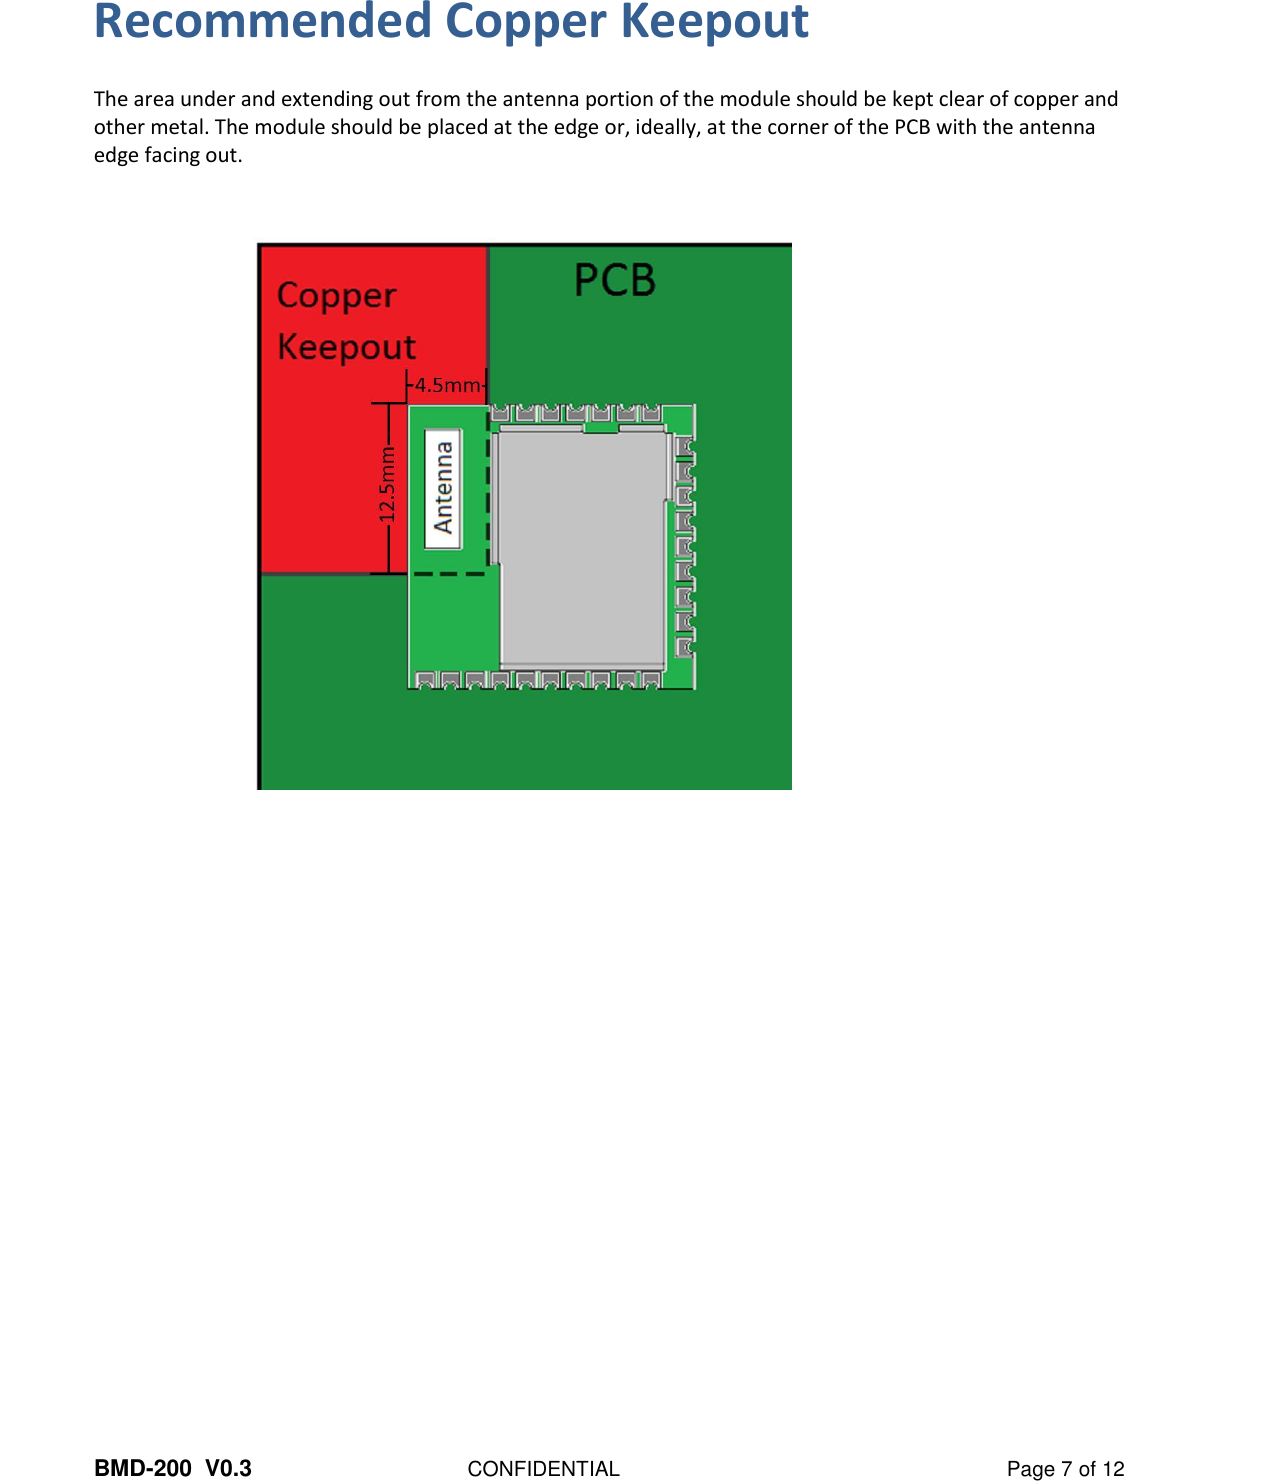  BMD-200  V0.3  CONFIDENTIAL  Page 7 of 12 Recommended Copper Keepout  The area under and extending out from the antenna portion of the module should be kept clear of copper and other metal. The module should be placed at the edge or, ideally, at the corner of the PCB with the antenna edge facing out.      